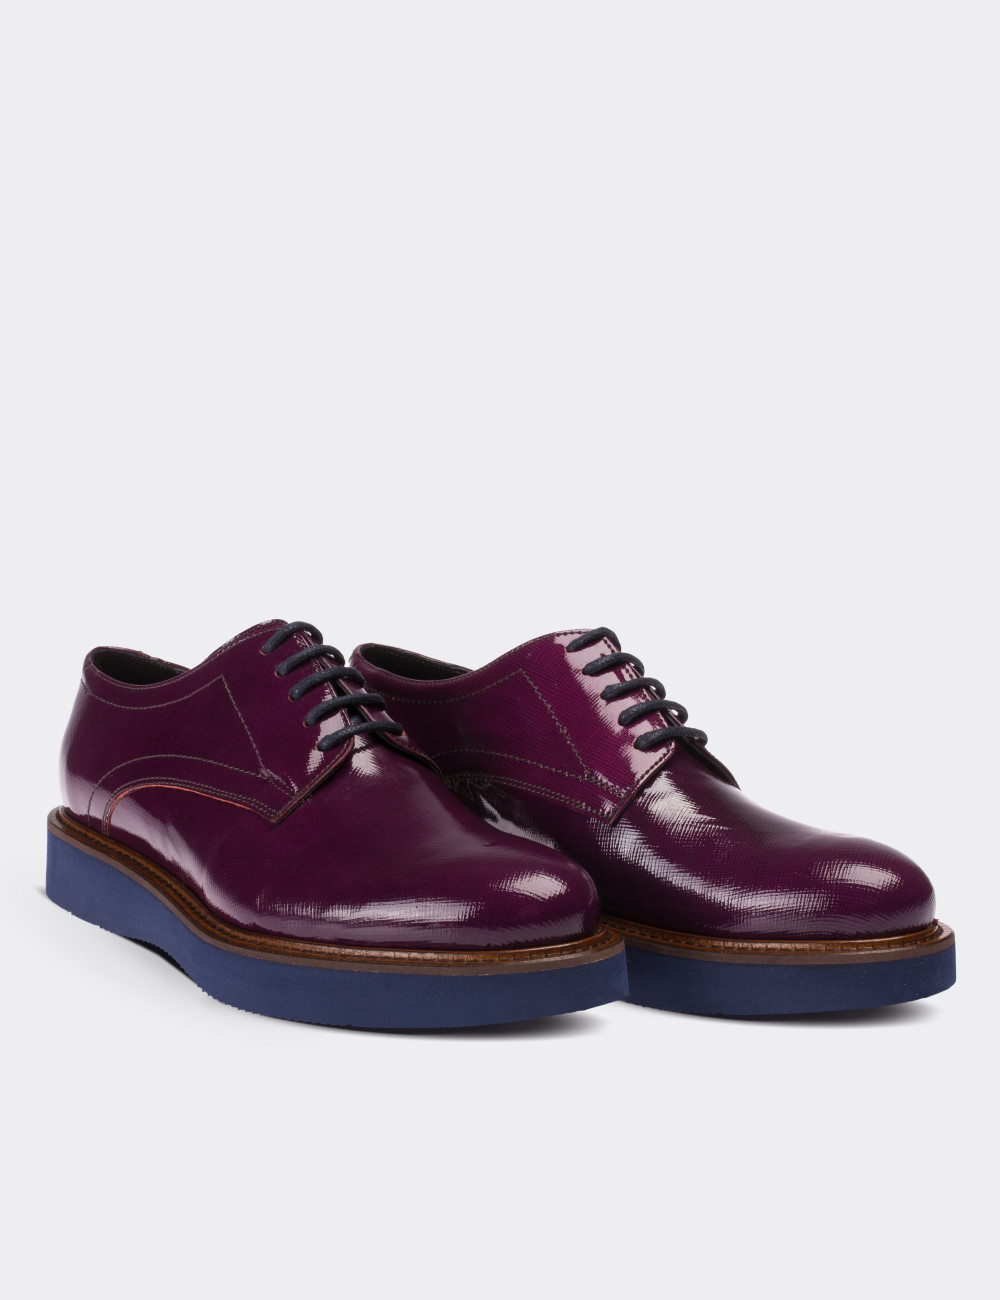 Purple Patent Leather Lace-up Shoes - 01430ZMORE03